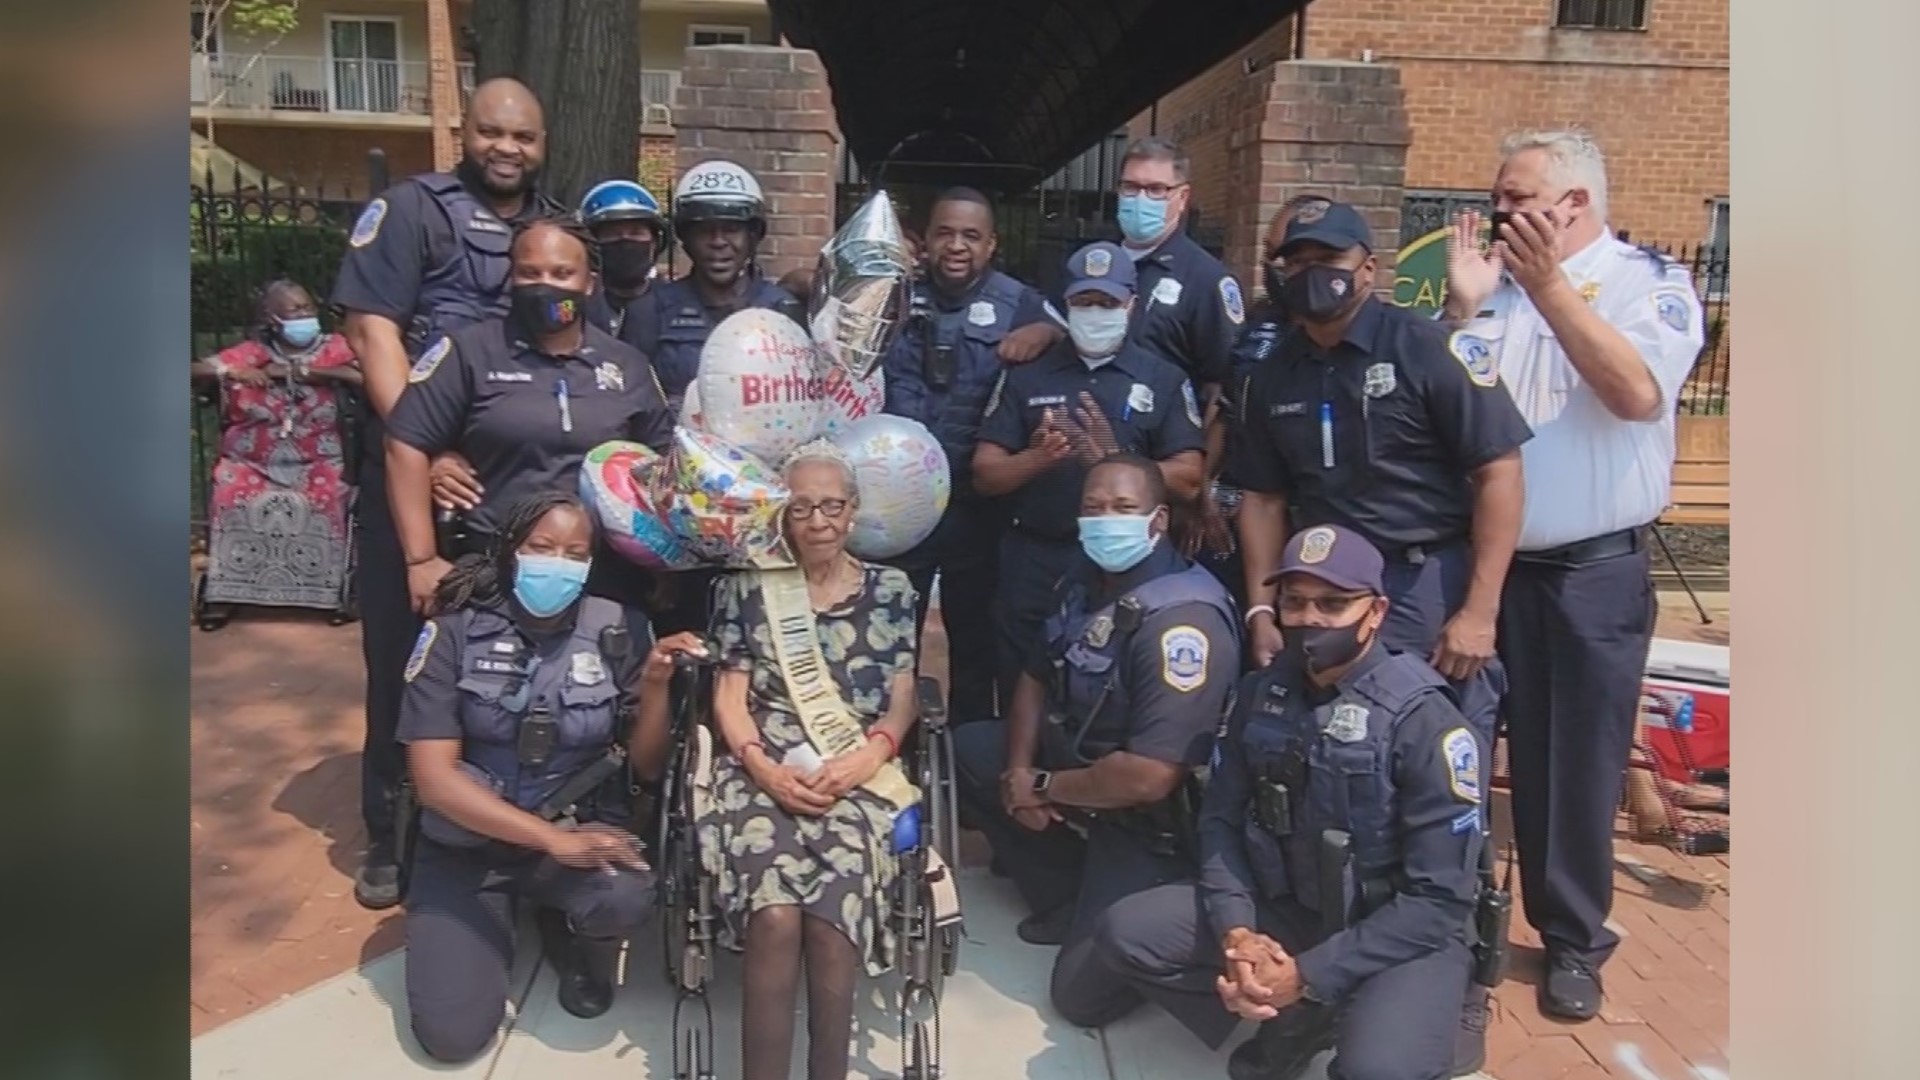 Dora Credle of Washington, D.C. was born on July 21, 1911. DC Police helped her celebrate her 110th birthday.